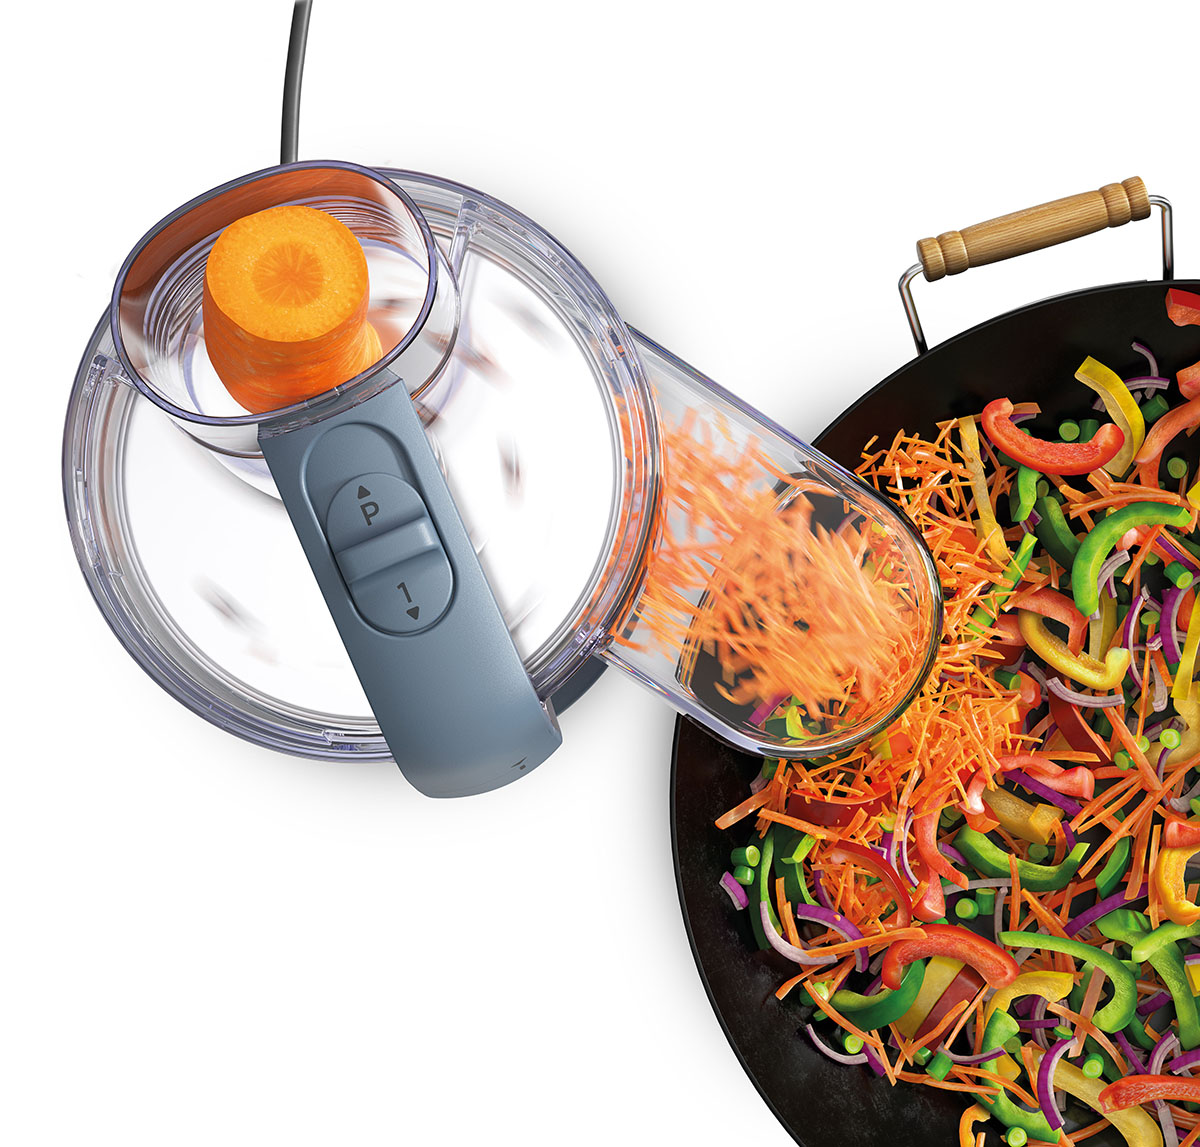 Kenwood Multipro Go Food Processor can chop, slice, grate, blend and knead  - SG Magazine